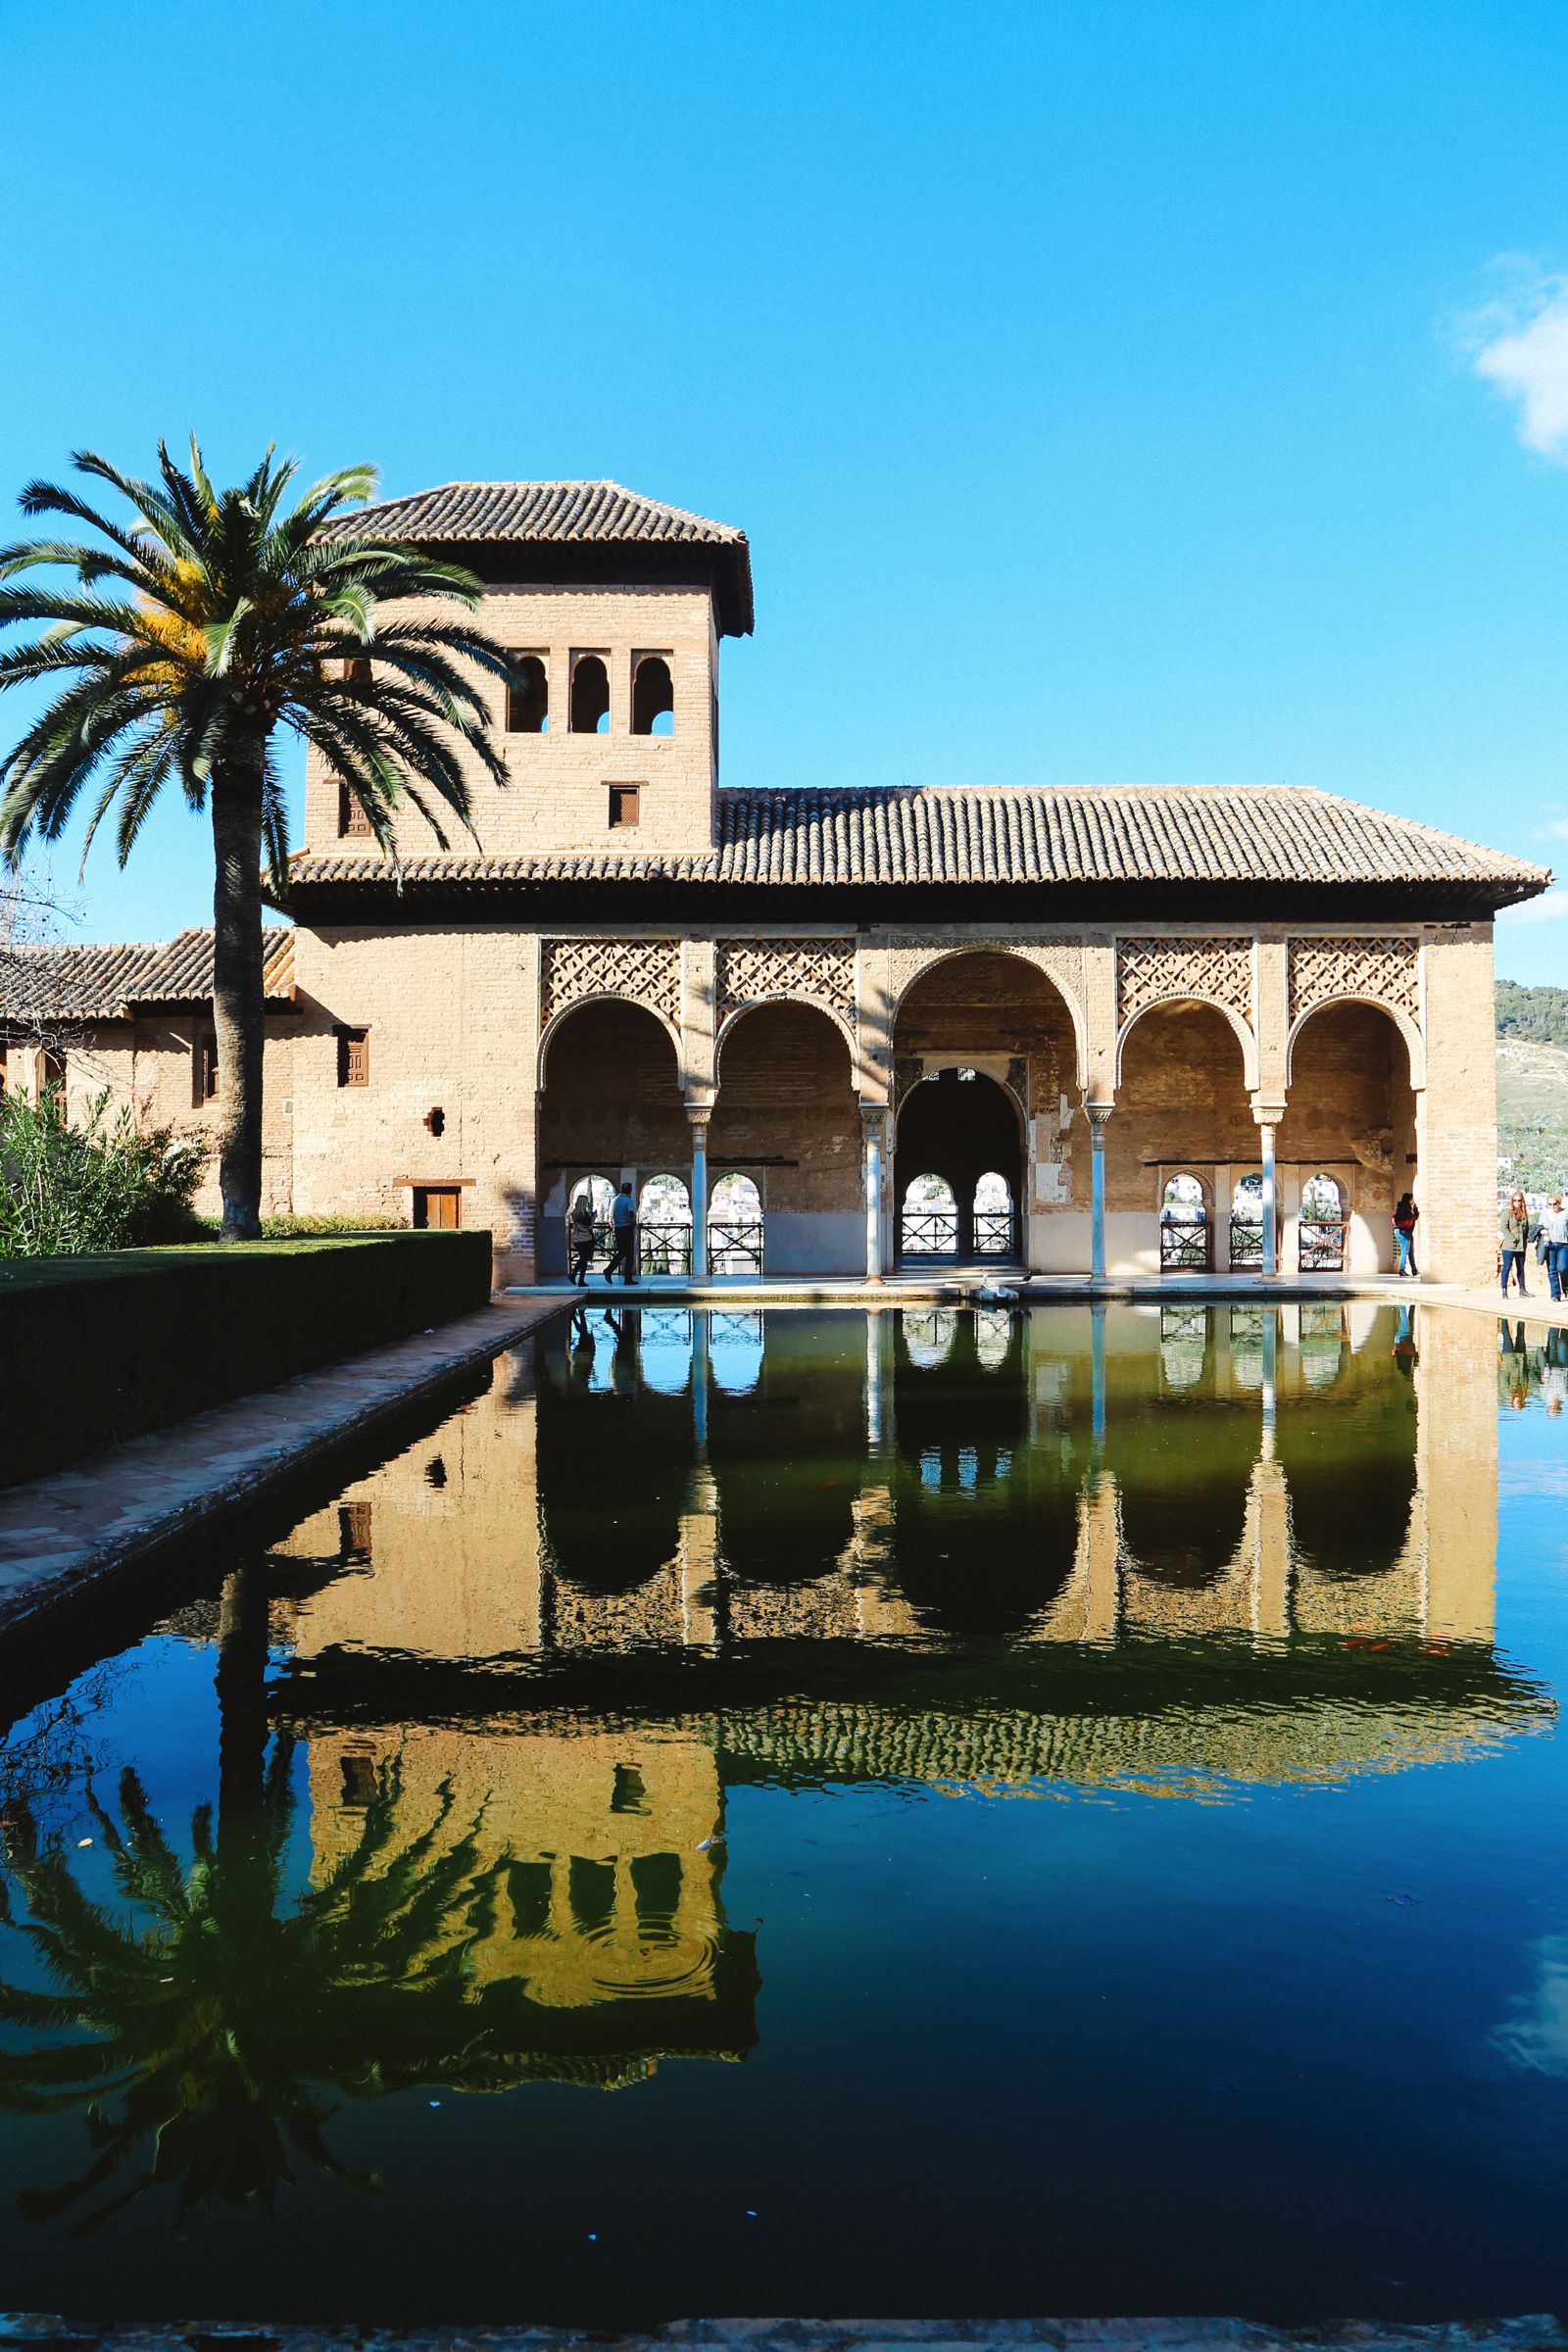 The Amazingly Intricate Alhambra Palace of Spain (80)